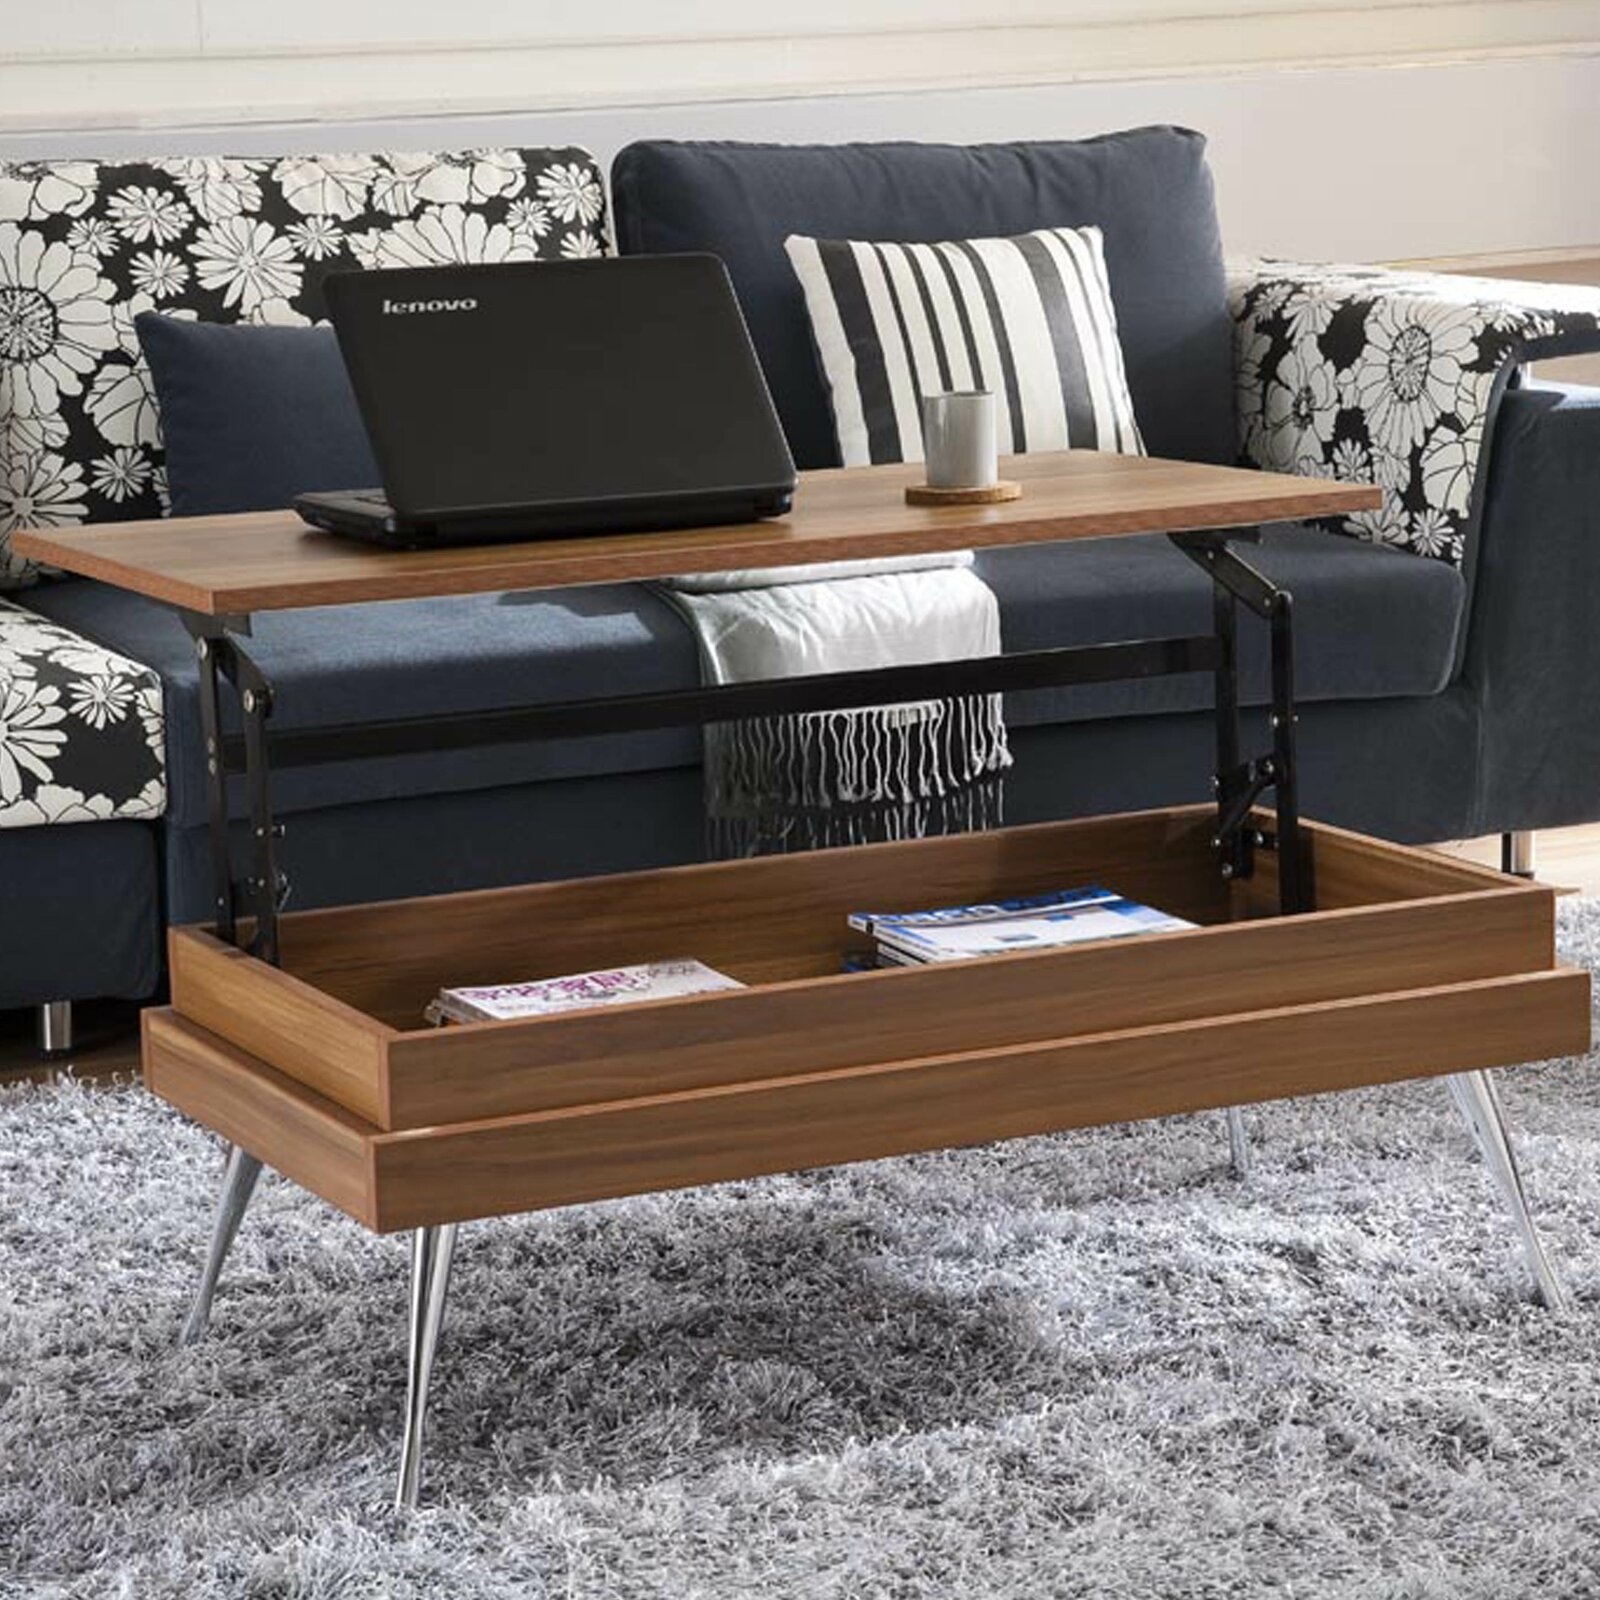 Lenora Lift Top Coffee Table with Storage - Image 1